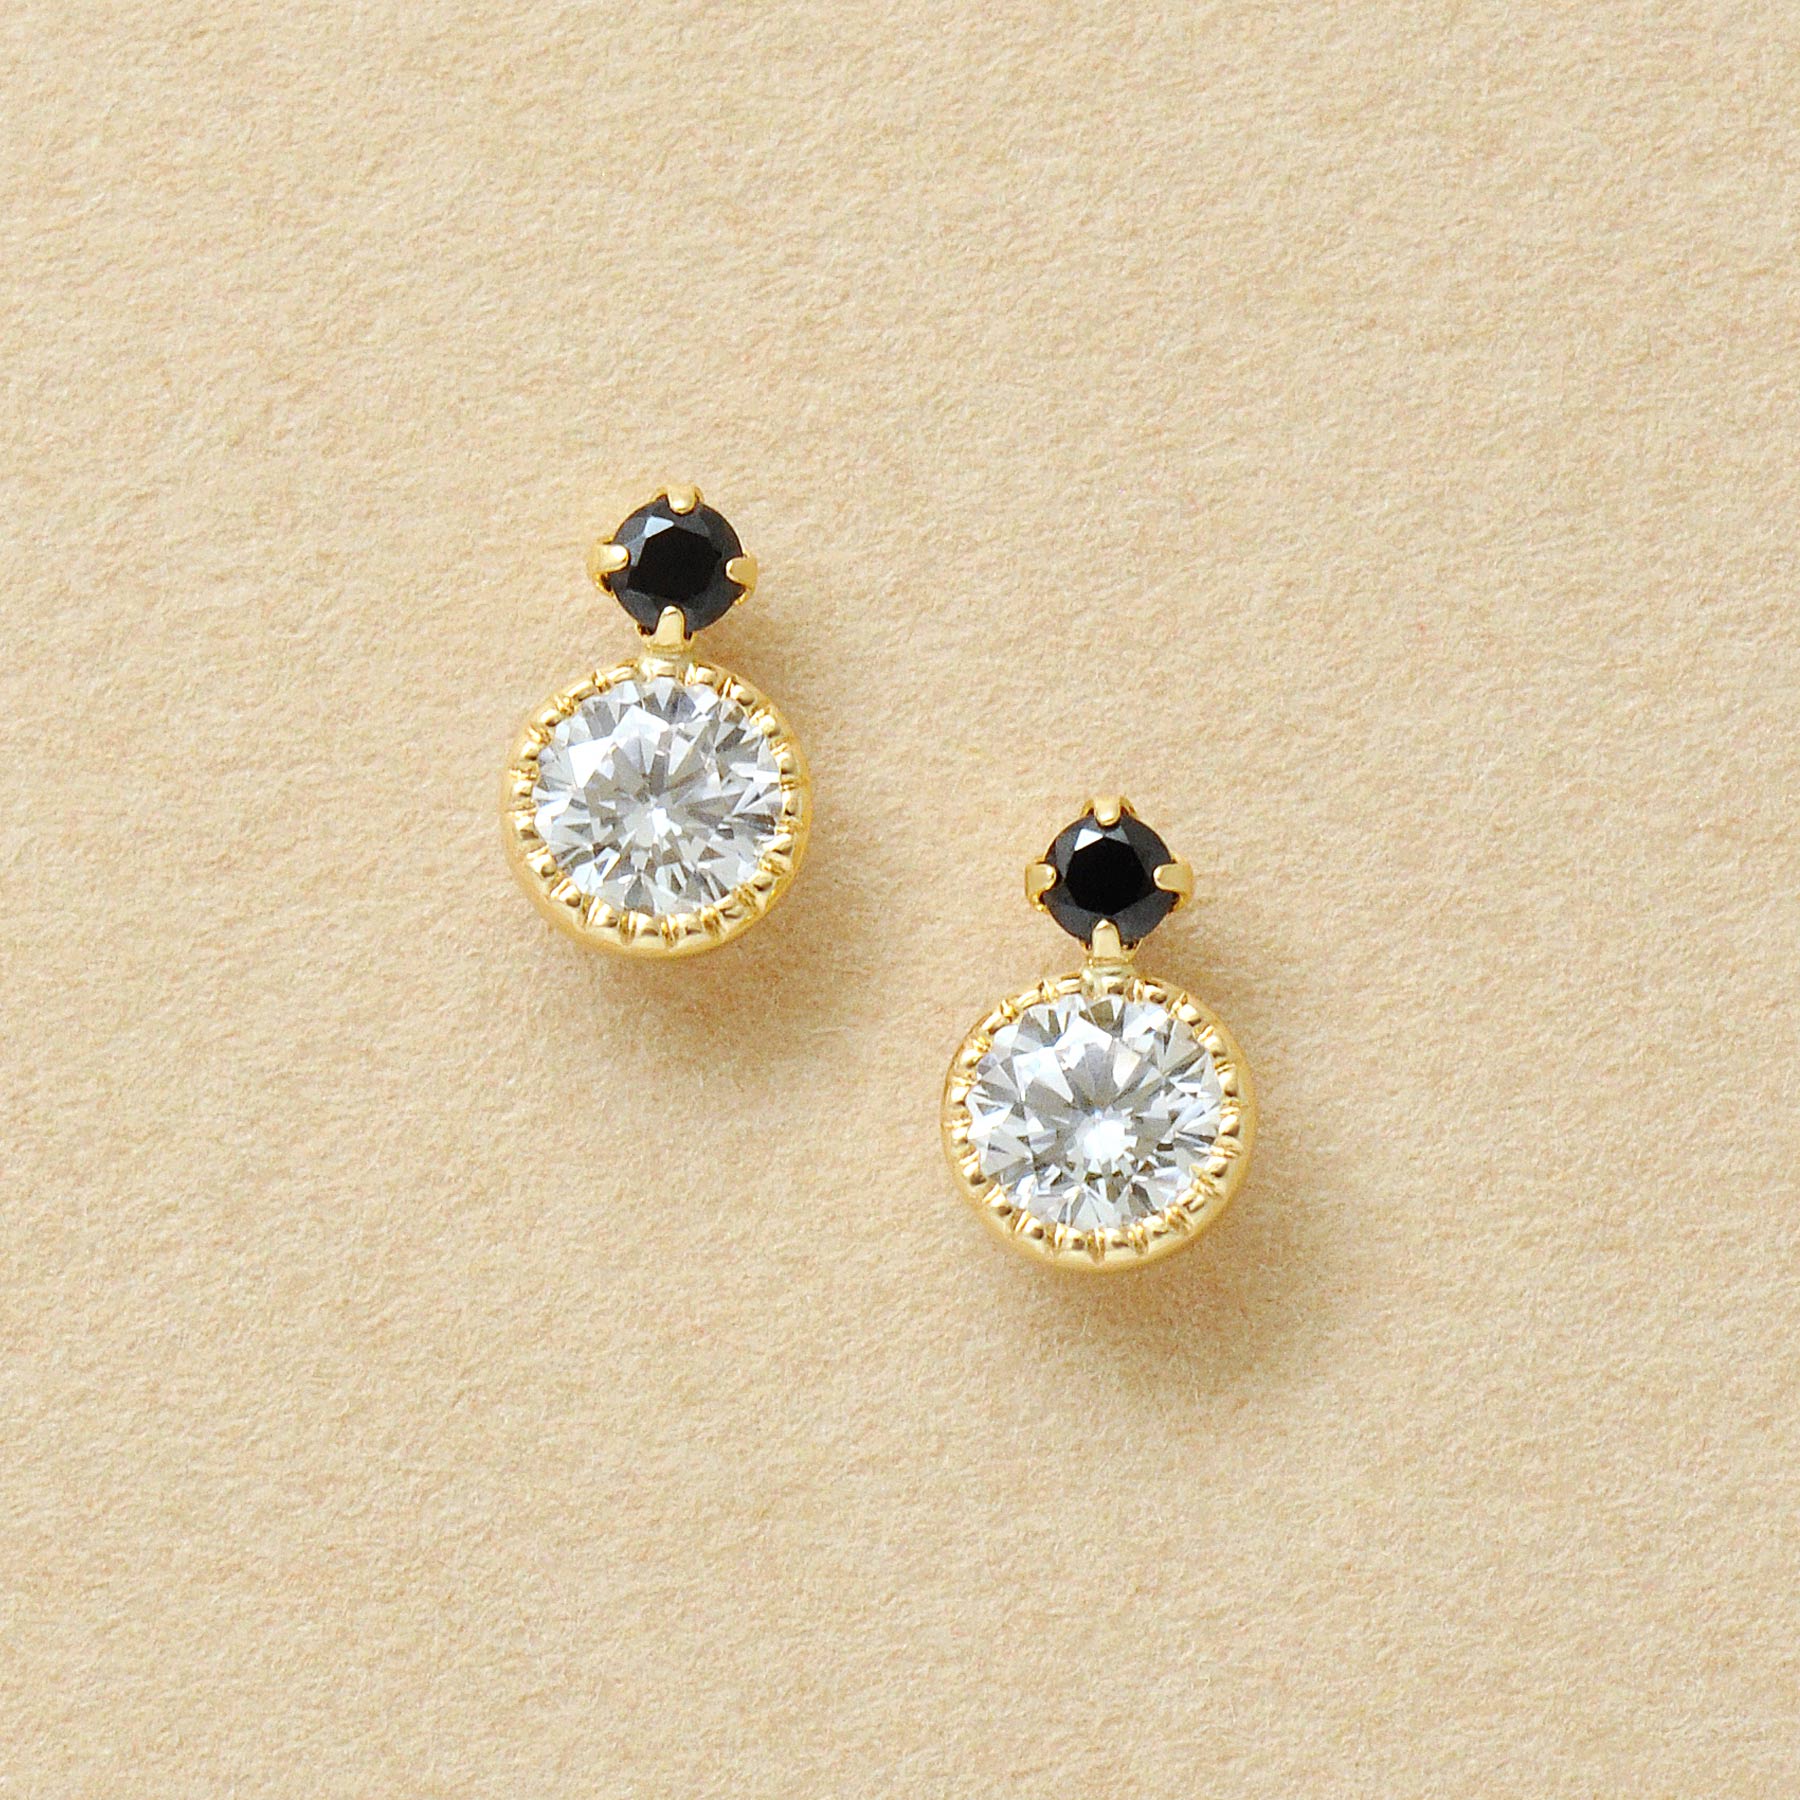 10K Black Color Circle Stud Earrings (Yellow Gold) - Product Image